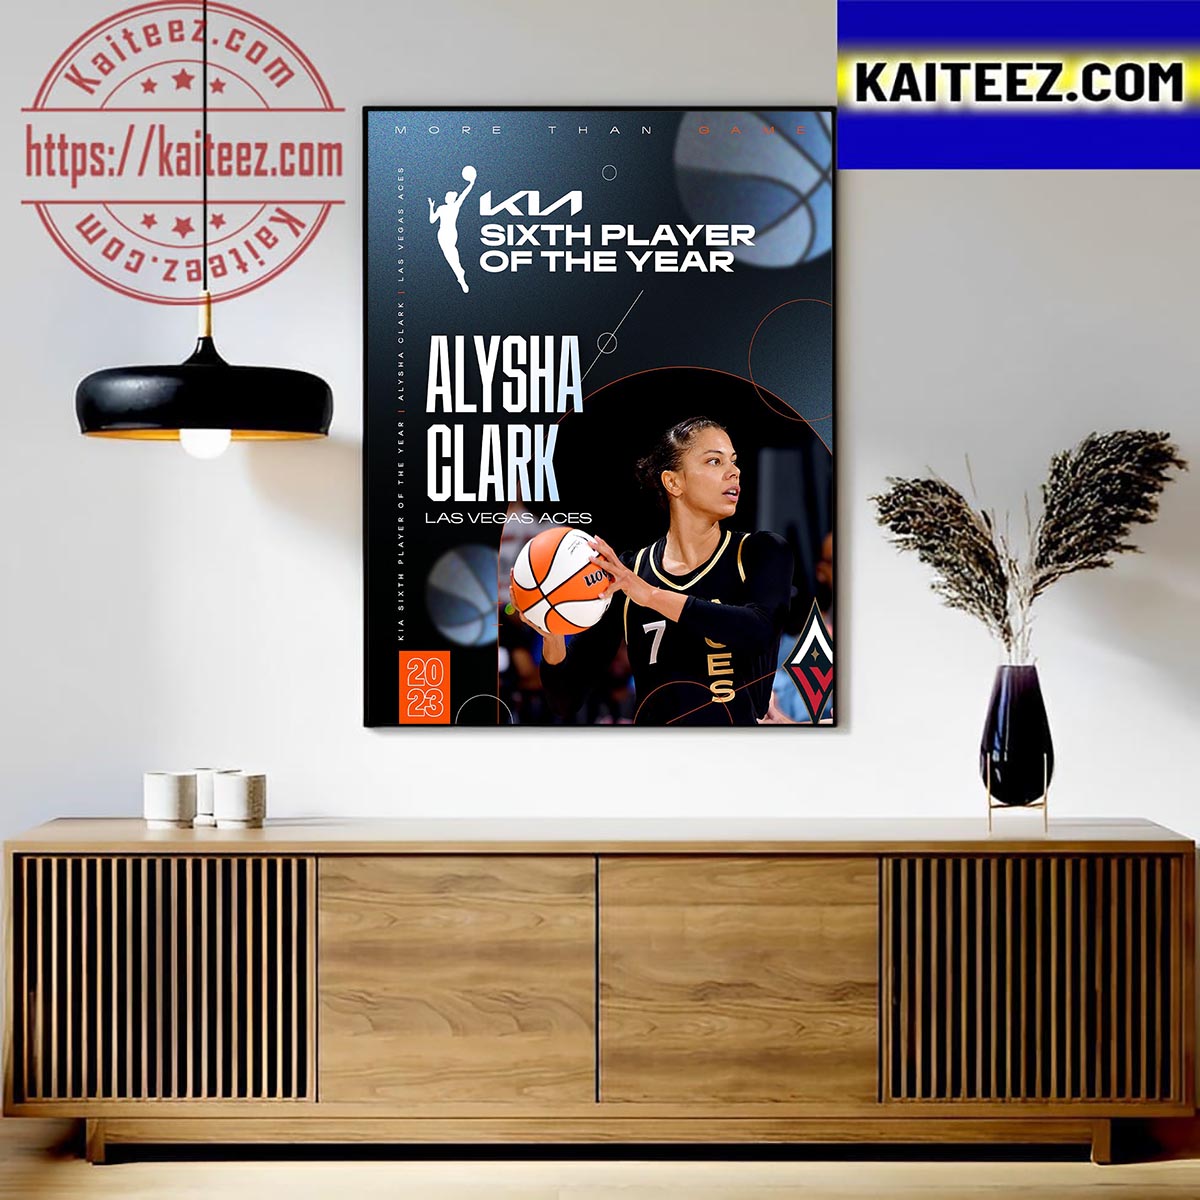 Congratulations To Alysha Clark Of The Las Vegas Aces For Being Named The 2023 WNBA Sixth Player Of The Year Art Decor Poster Canvas